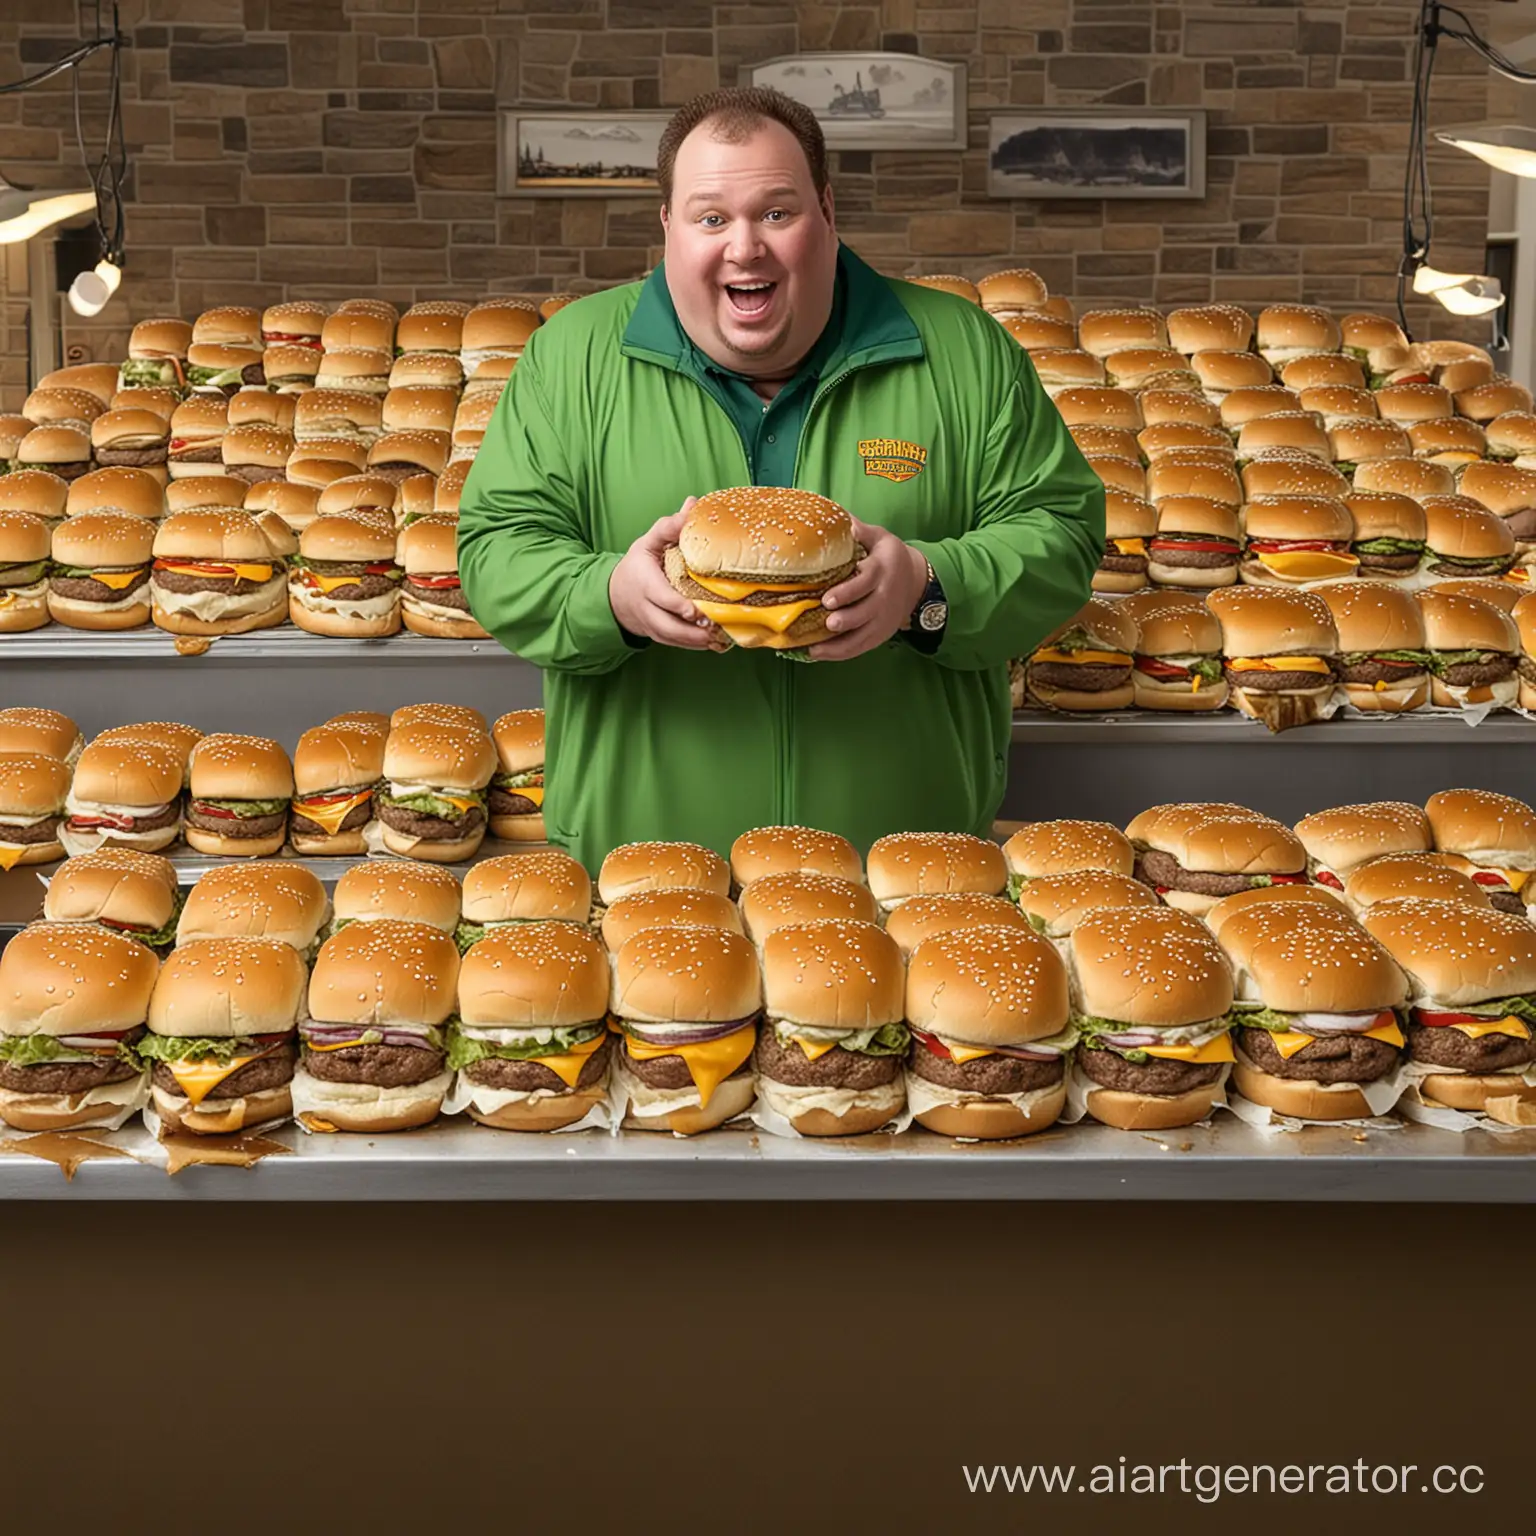 Hungry-Man-Devours-36-Cheeseburgers-in-a-Green-Jacket